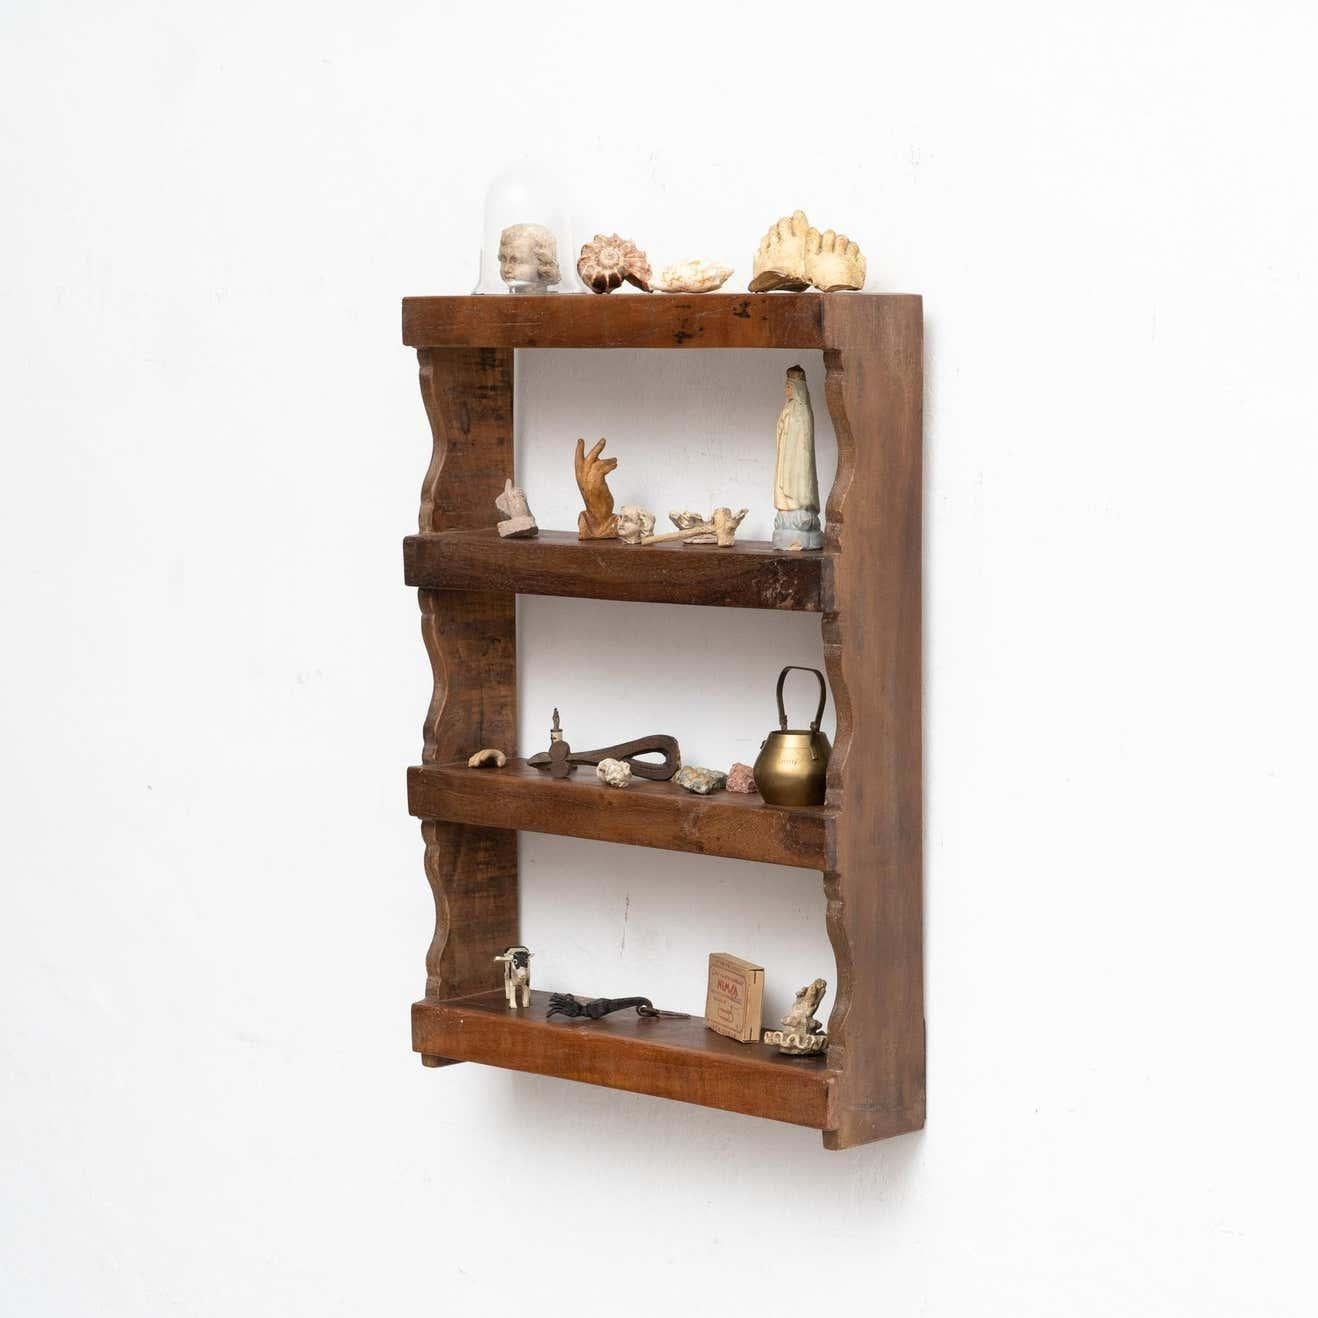 Spanish Cabinet of Curiosities Sculptural Wall Shelving Artwork, circa 1950 For Sale